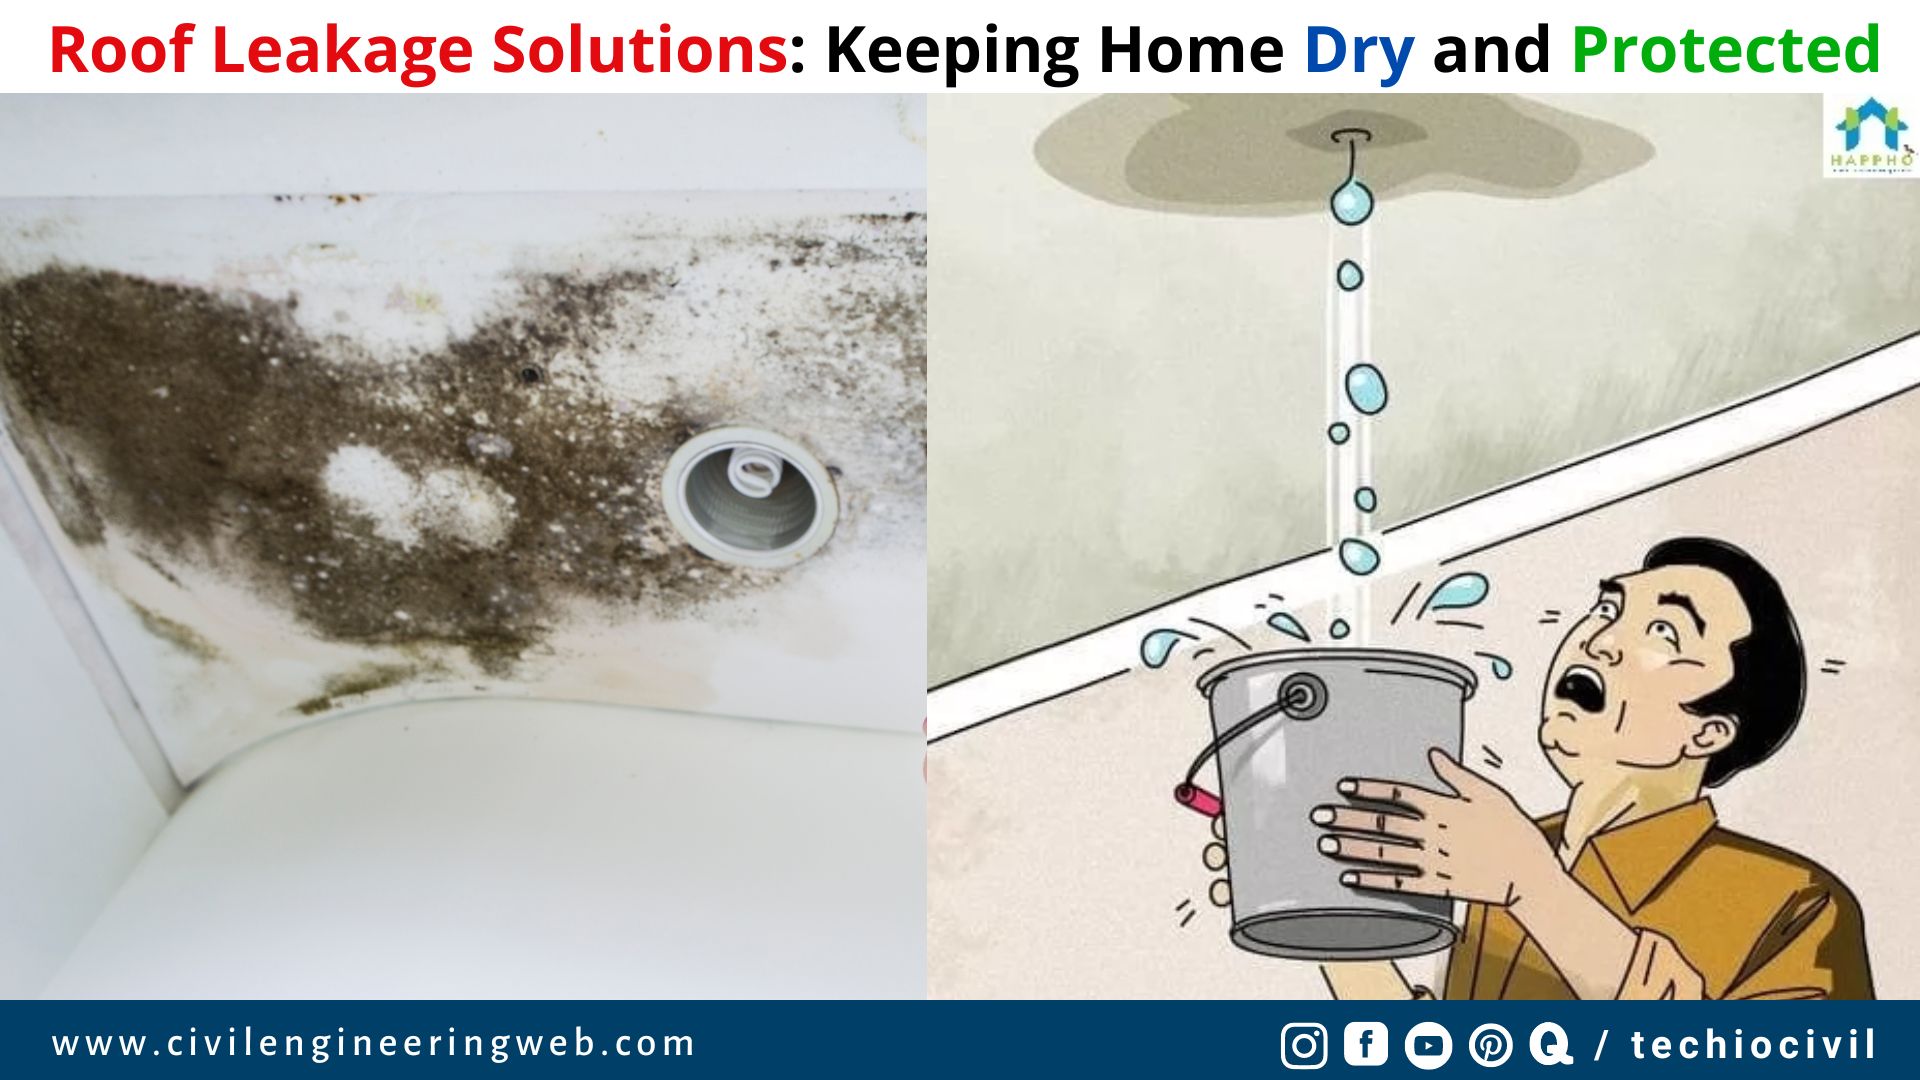 Roof Leakage Solutions